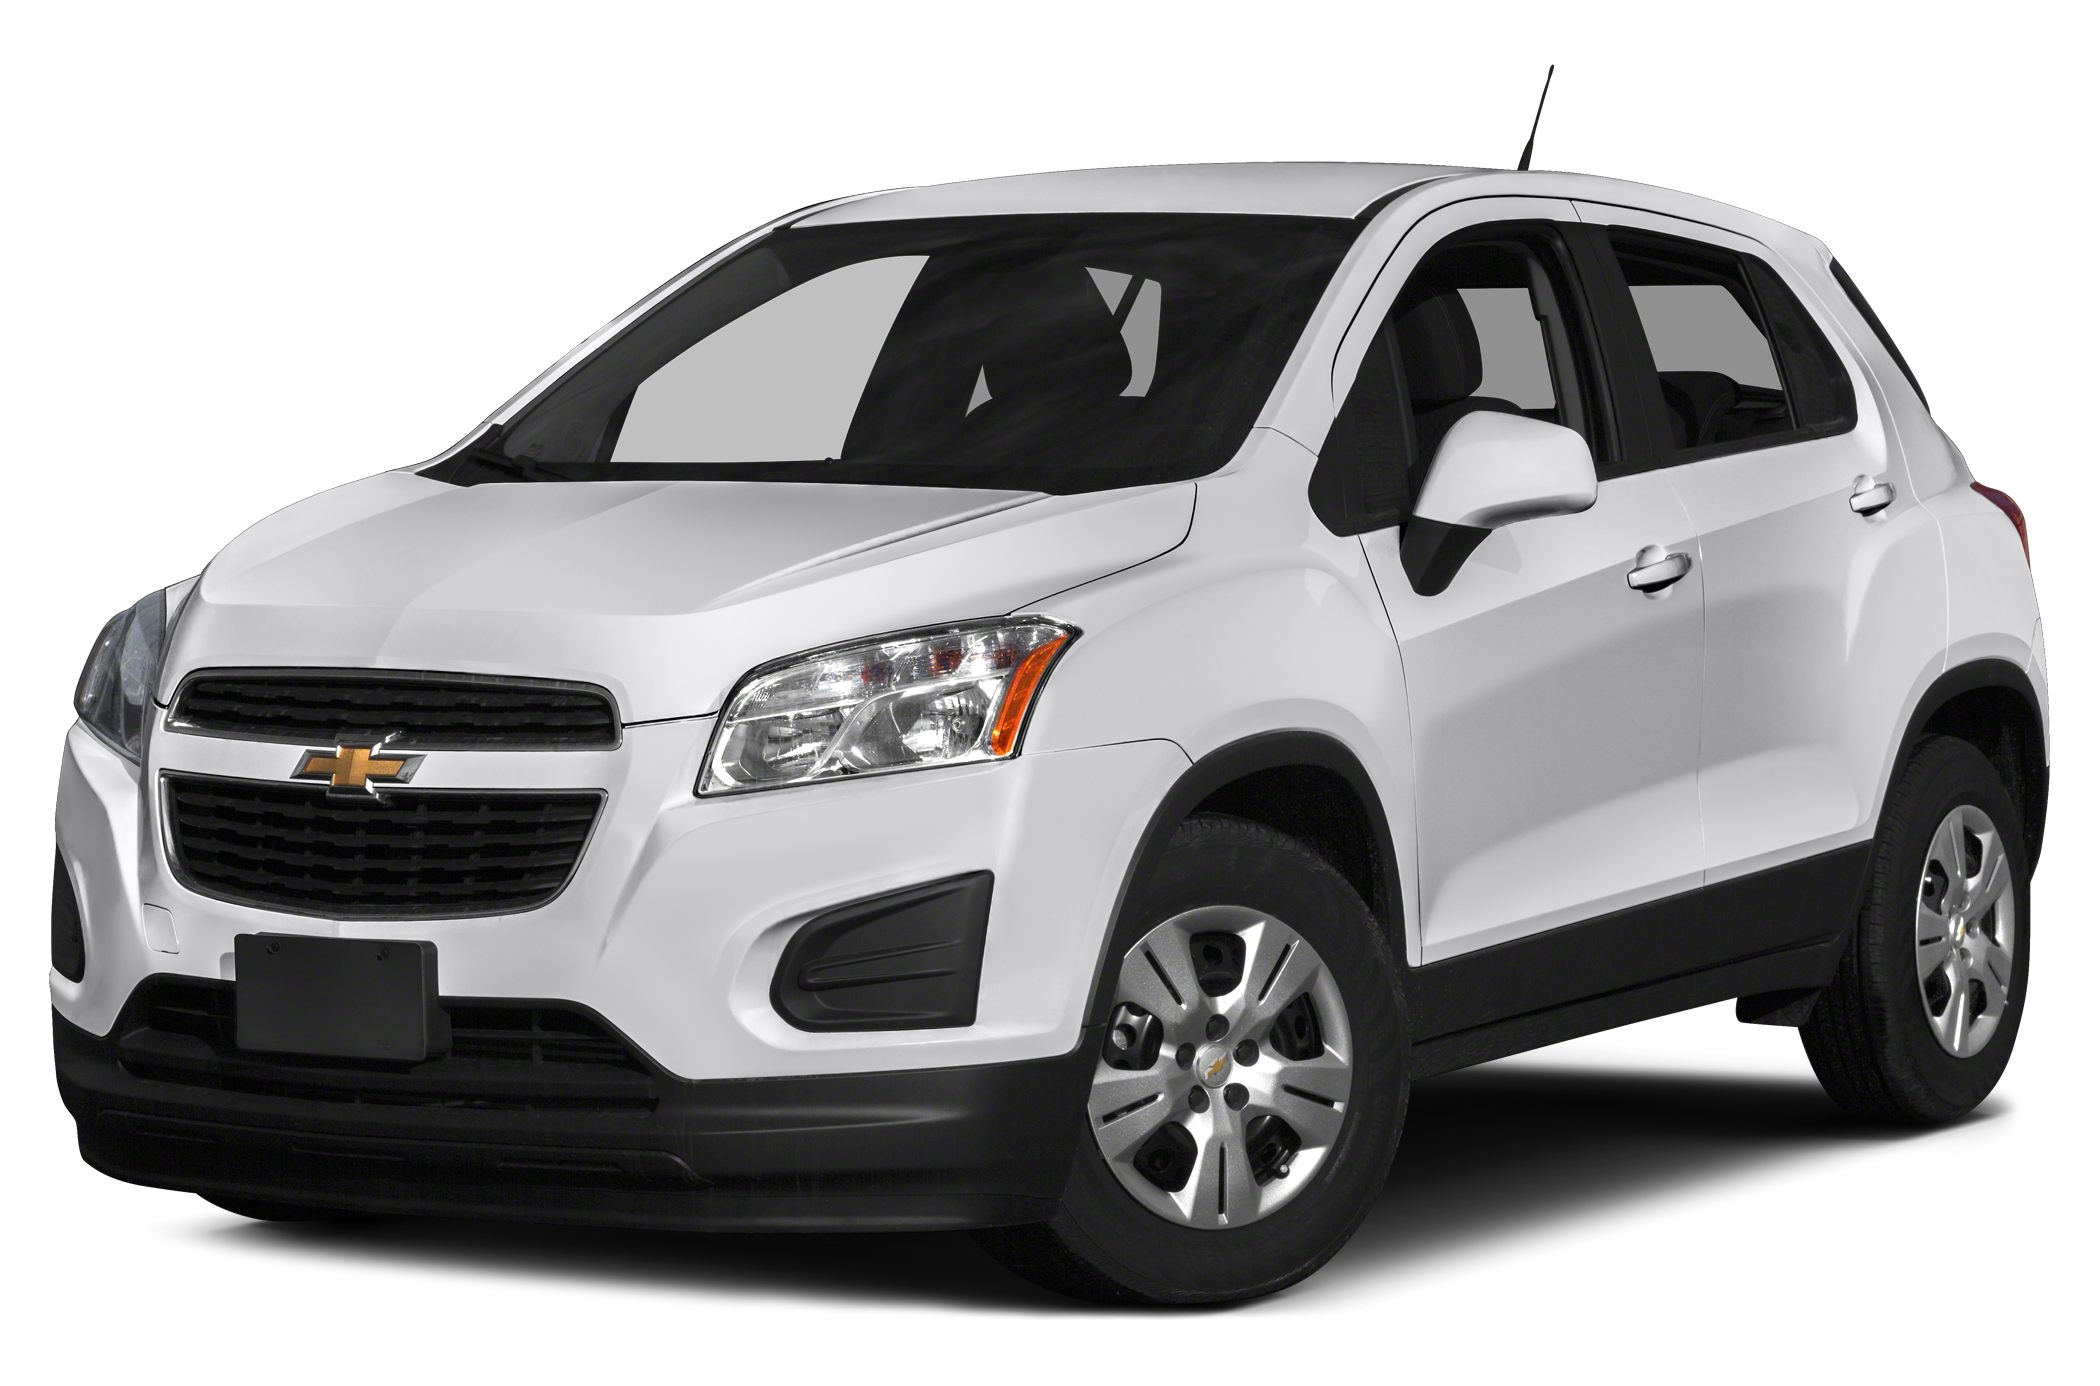 Chevy Trax Interior Size 2016 Chevrolet Trax Ls W 1ls All Wheel Drive Specs and Prices